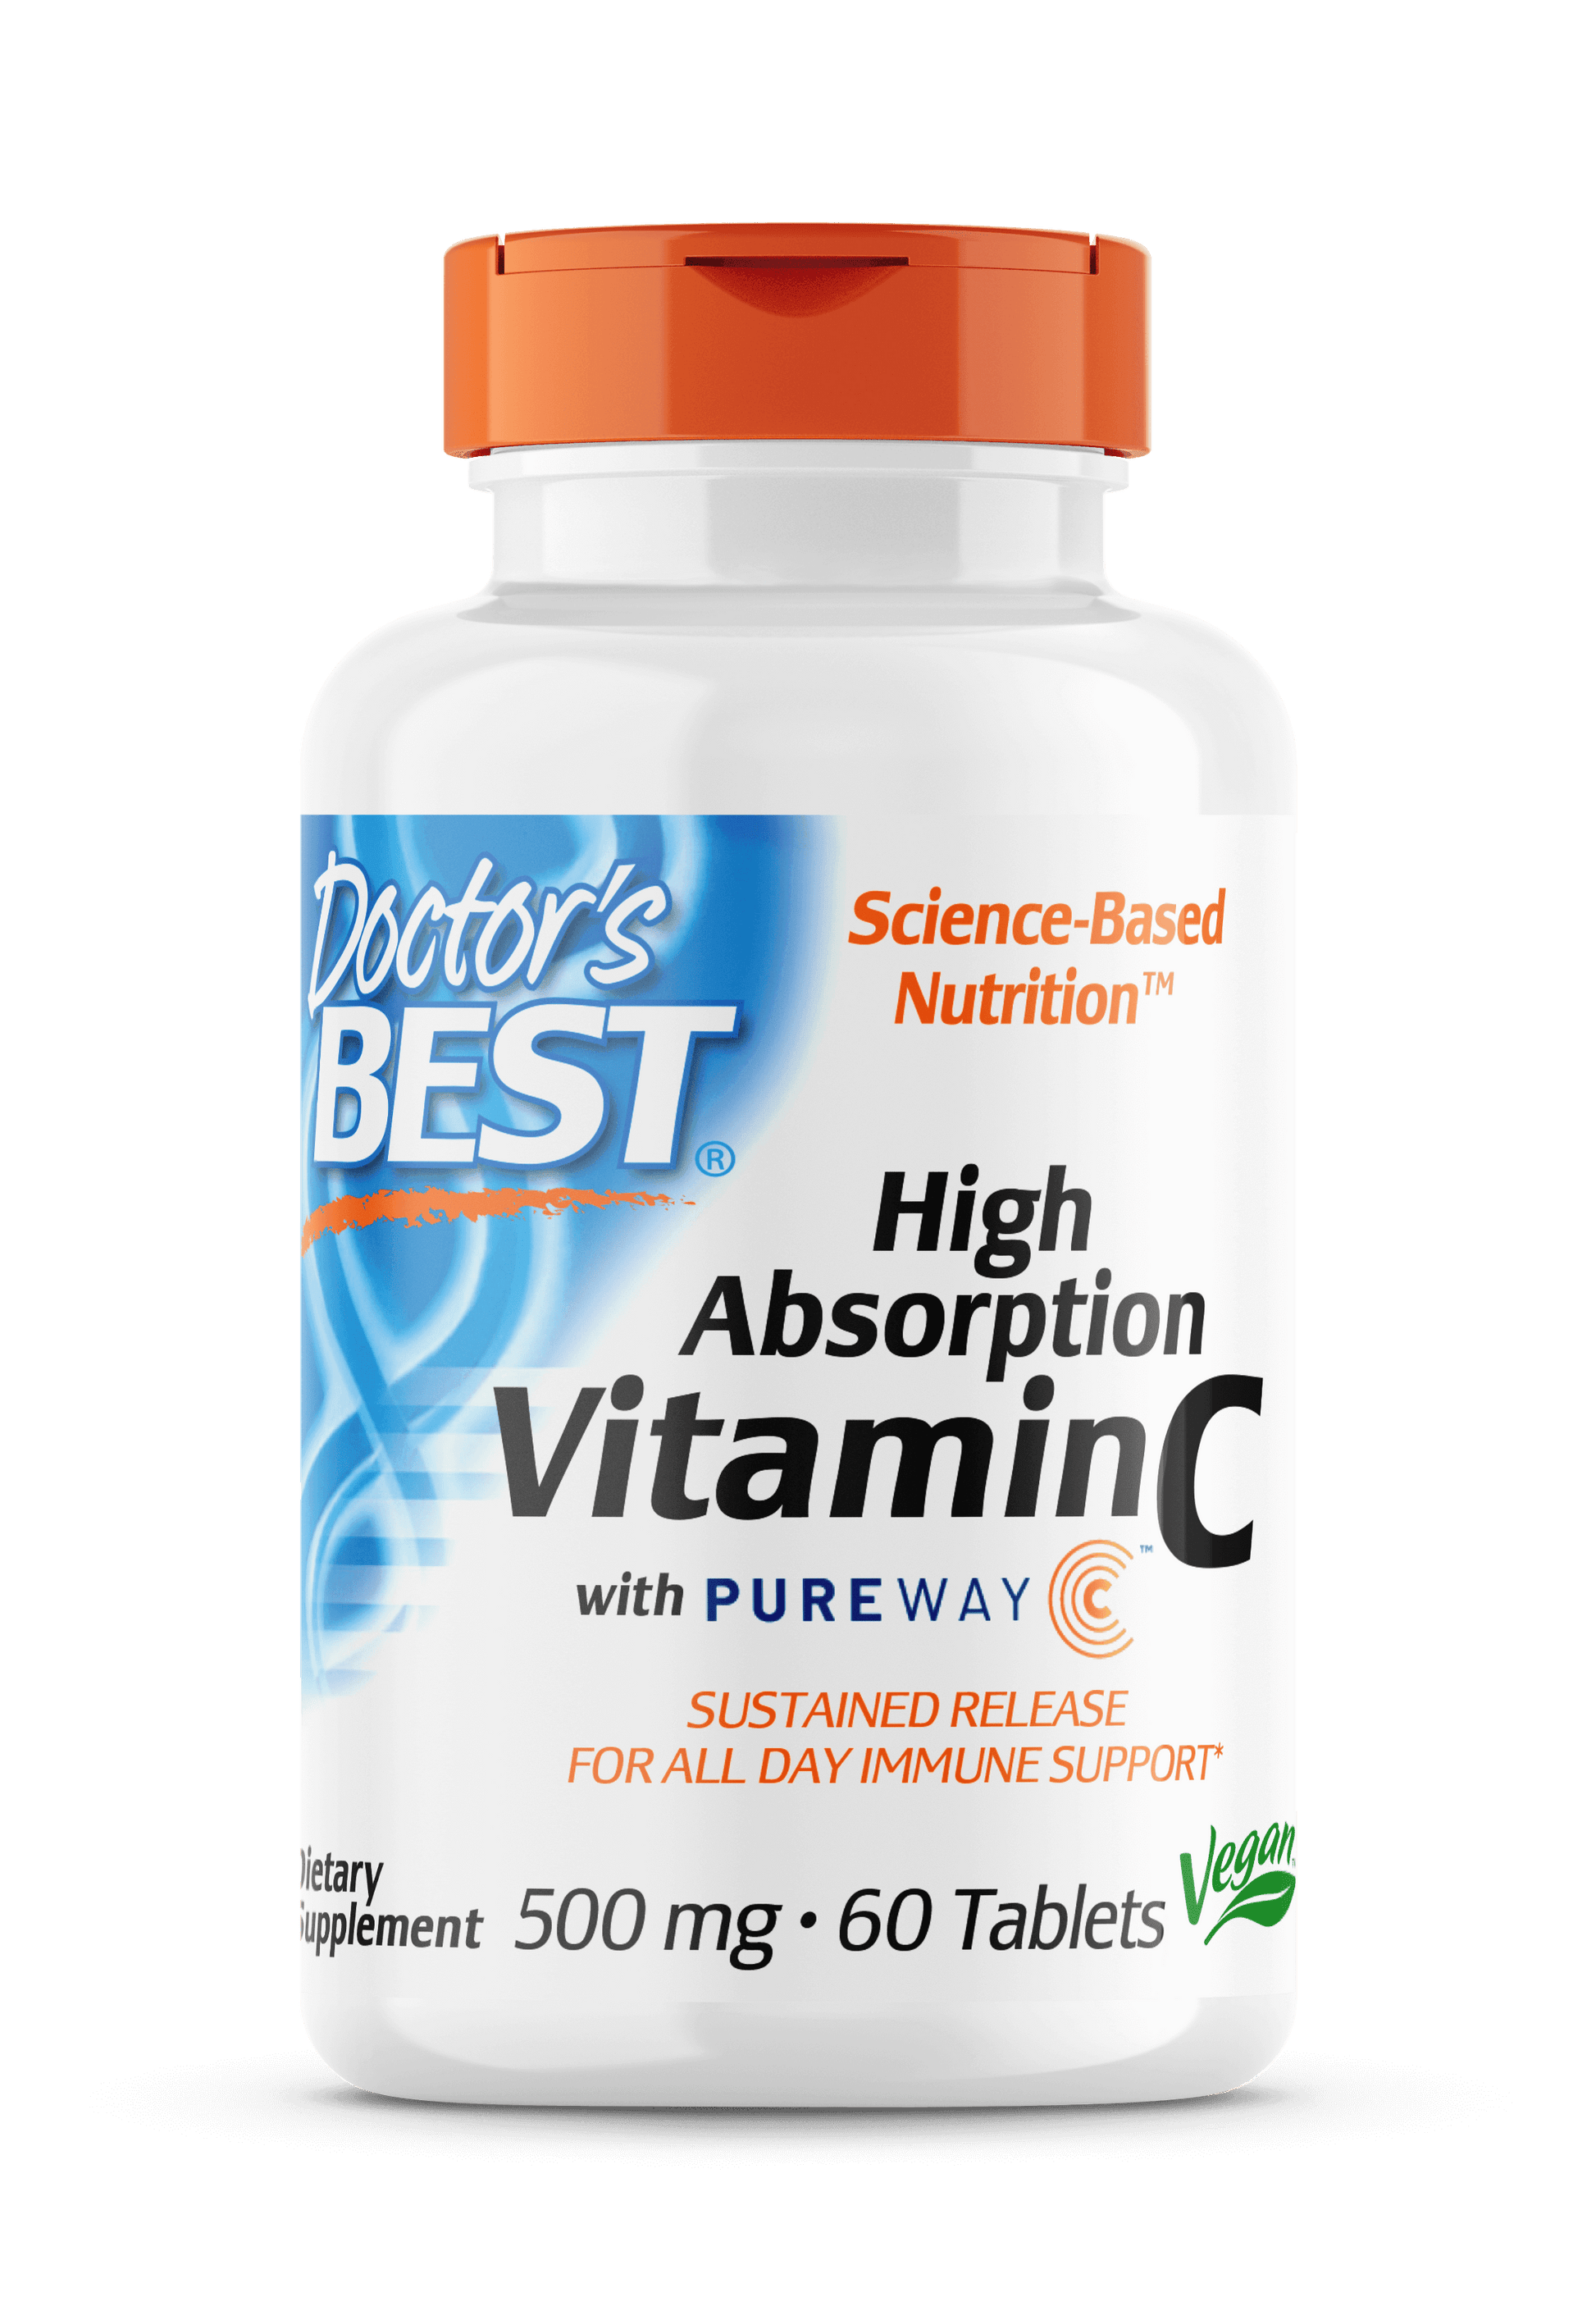 Doctor's Best Vitamin C with Pureway-C 60 Tablets